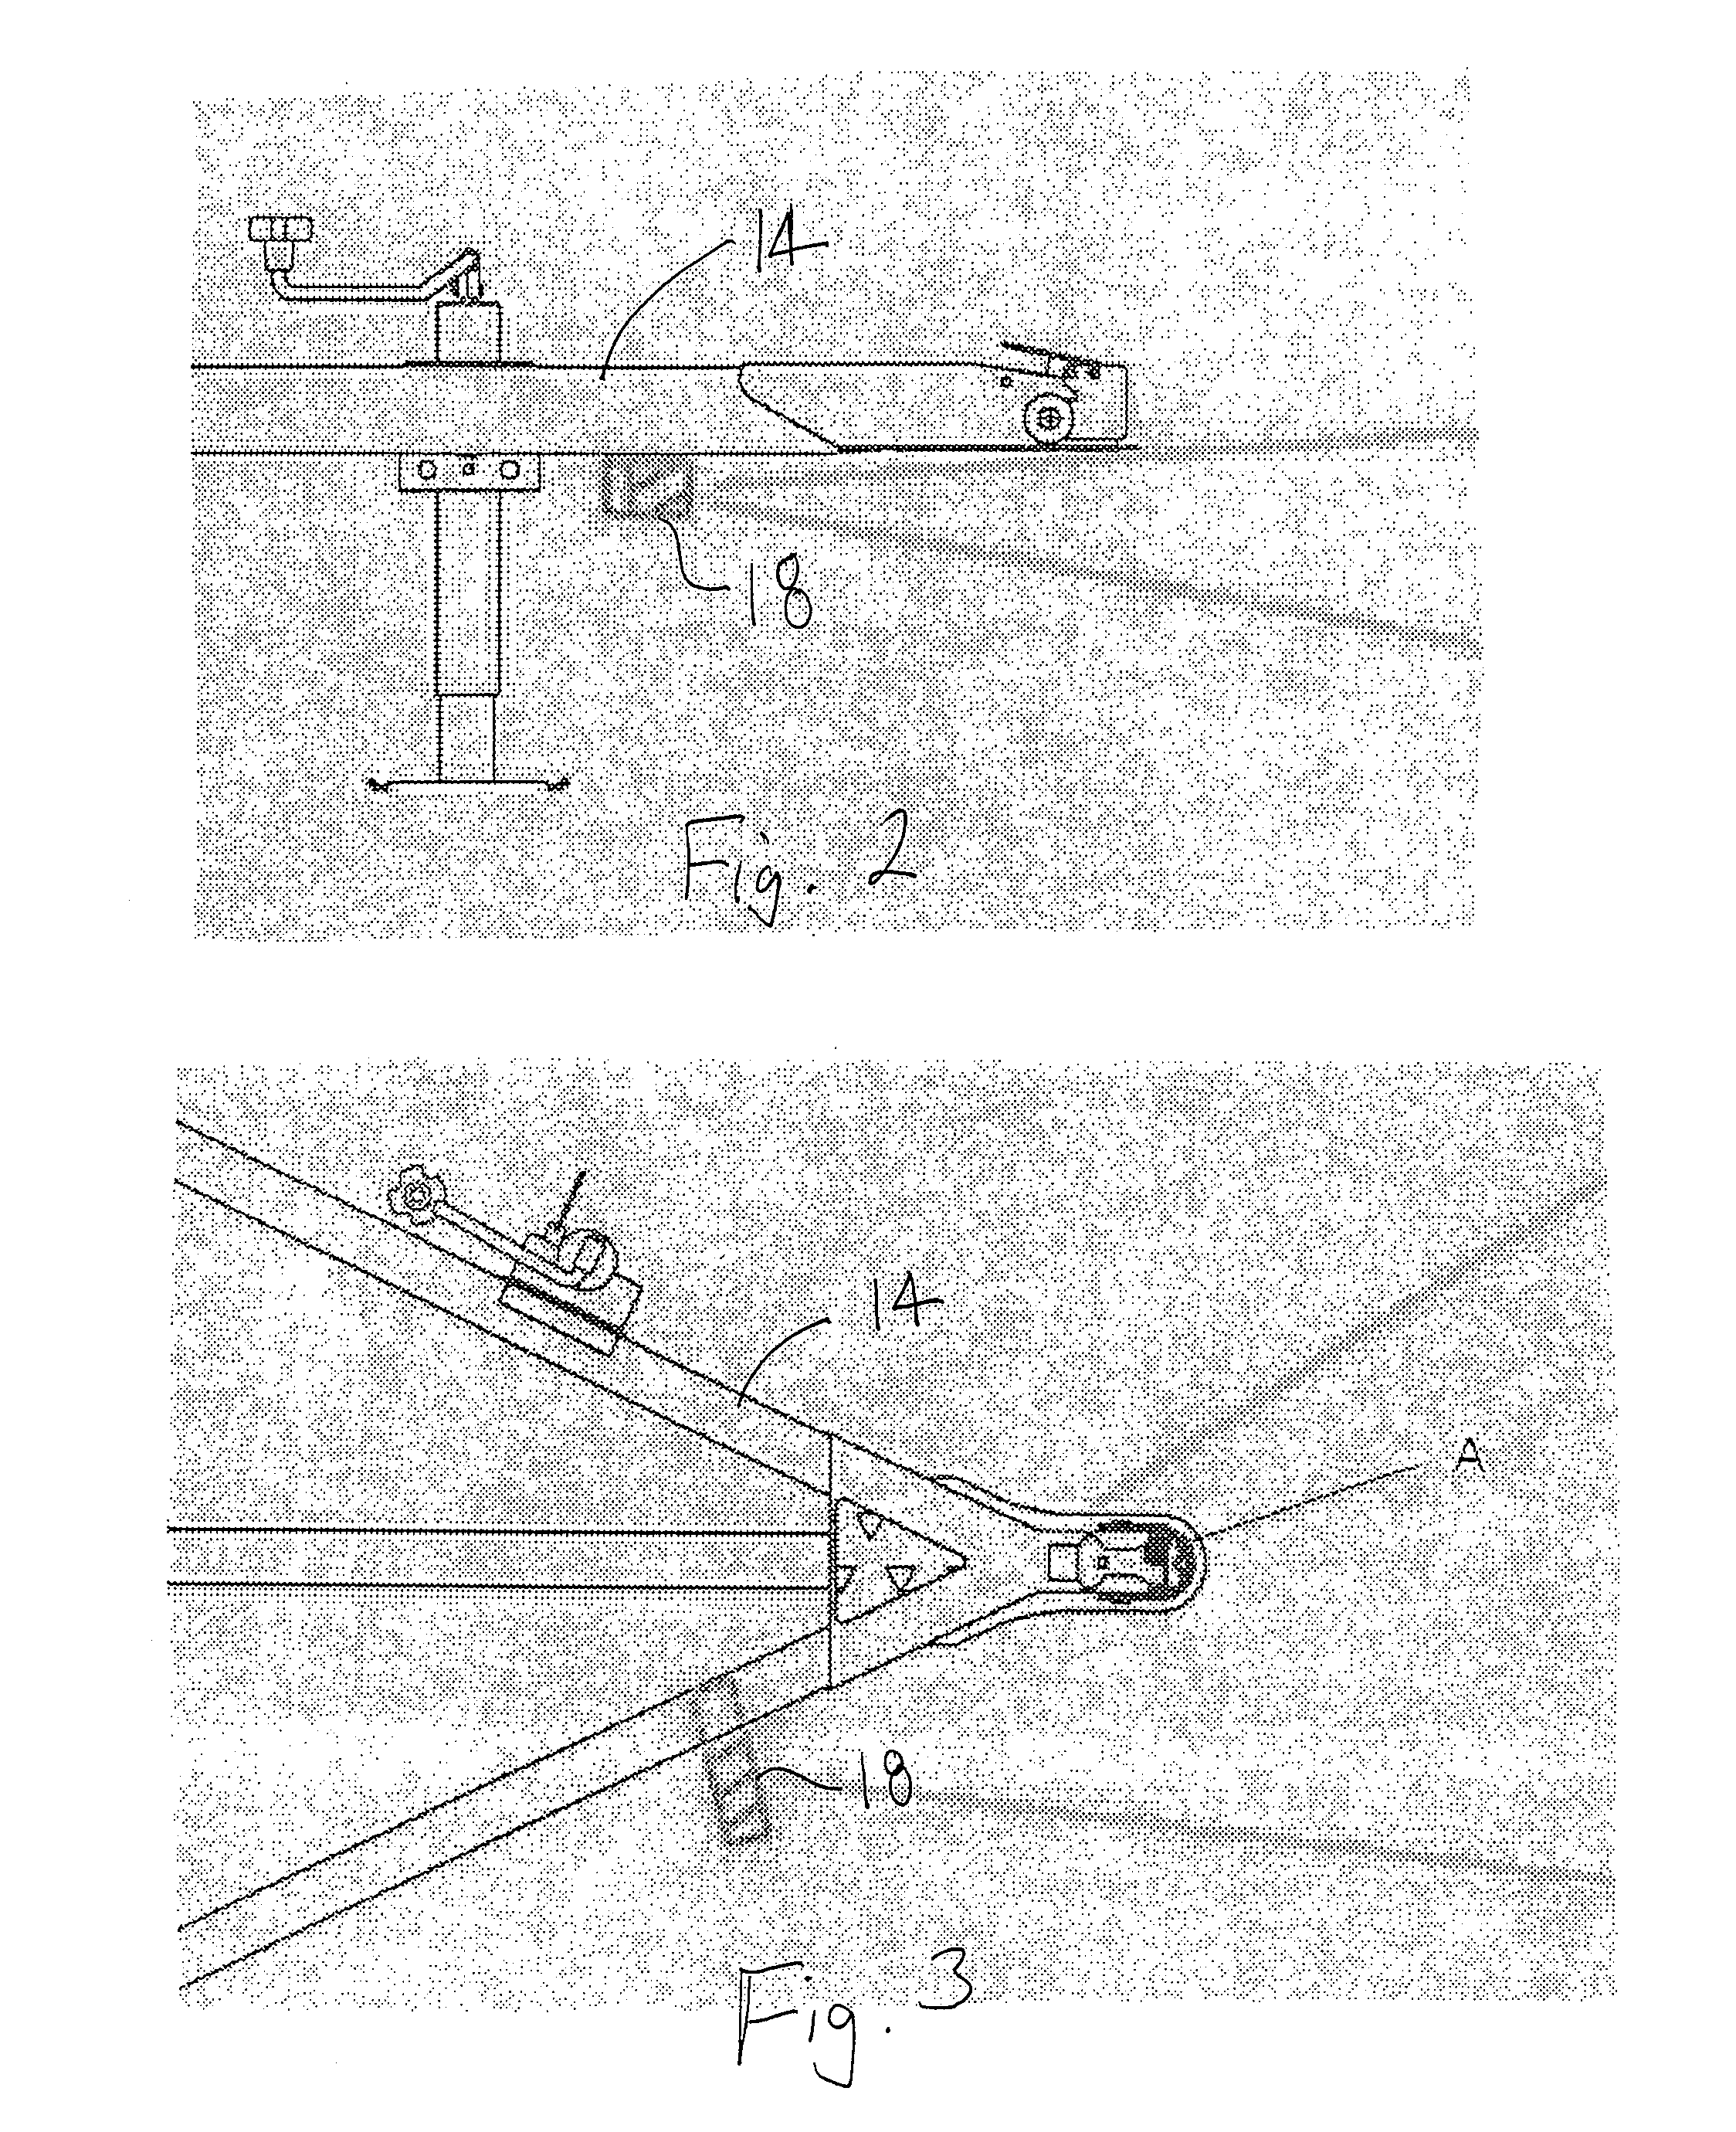 Trailer hitch alignment device and method